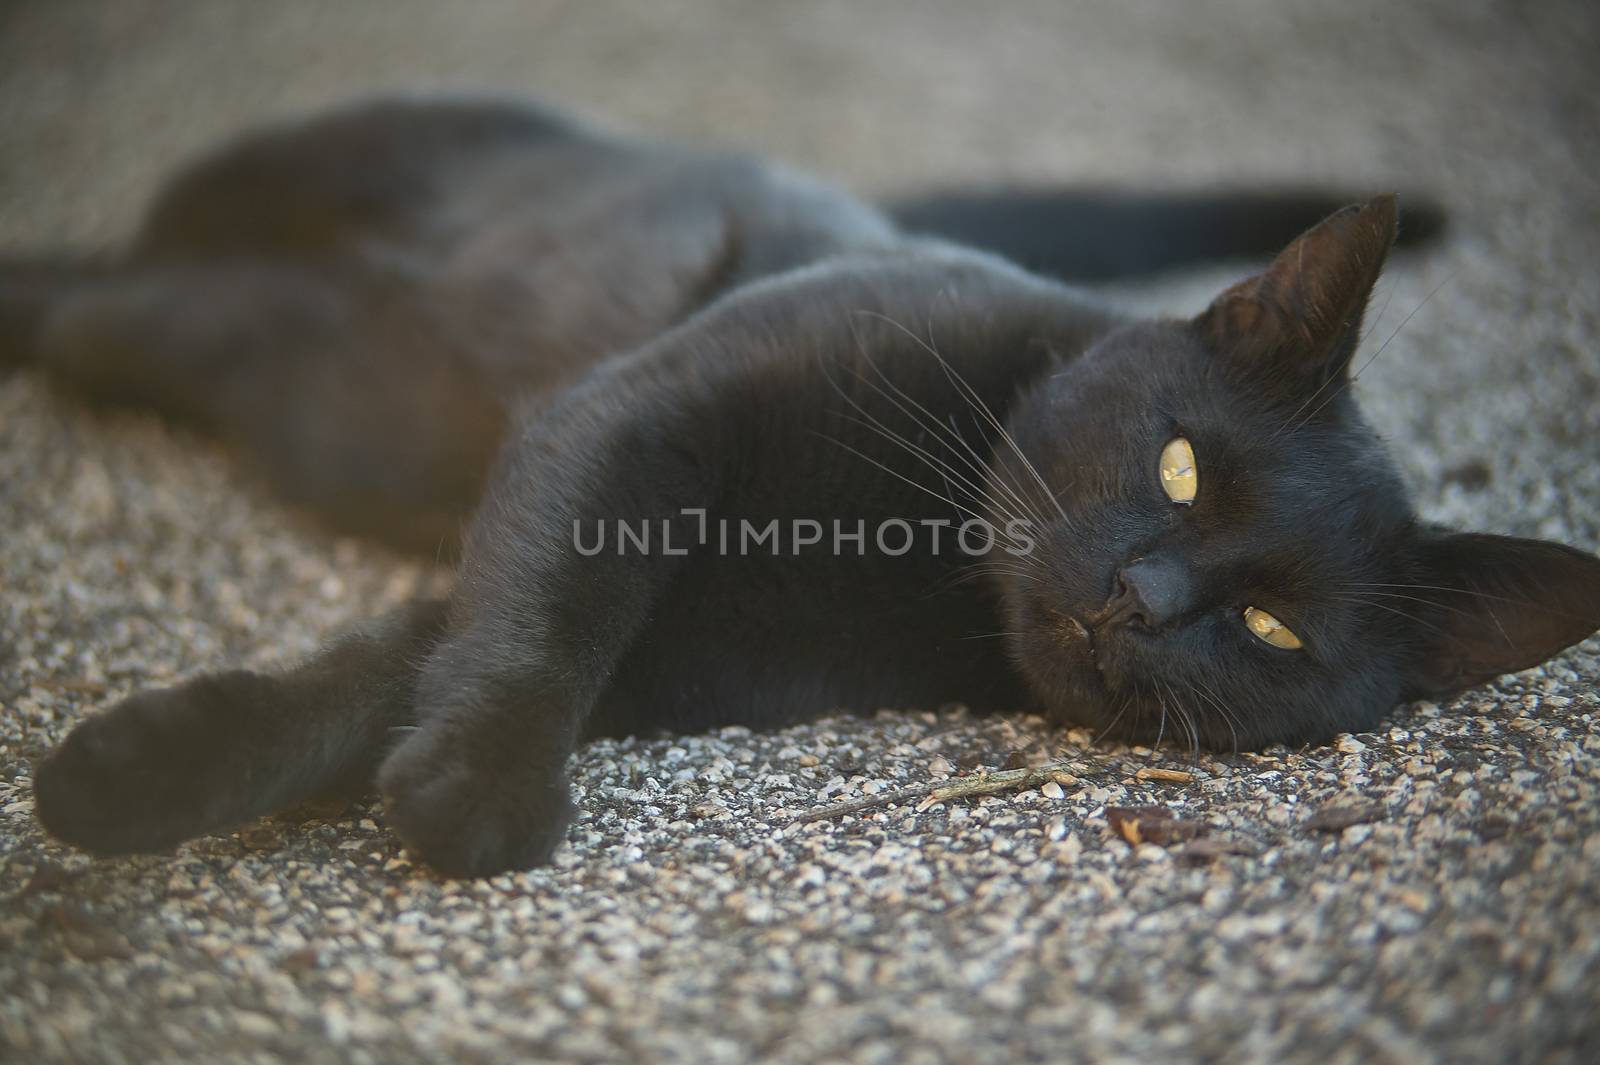 The muzzle of a black cat lying down on the ground looks ahead